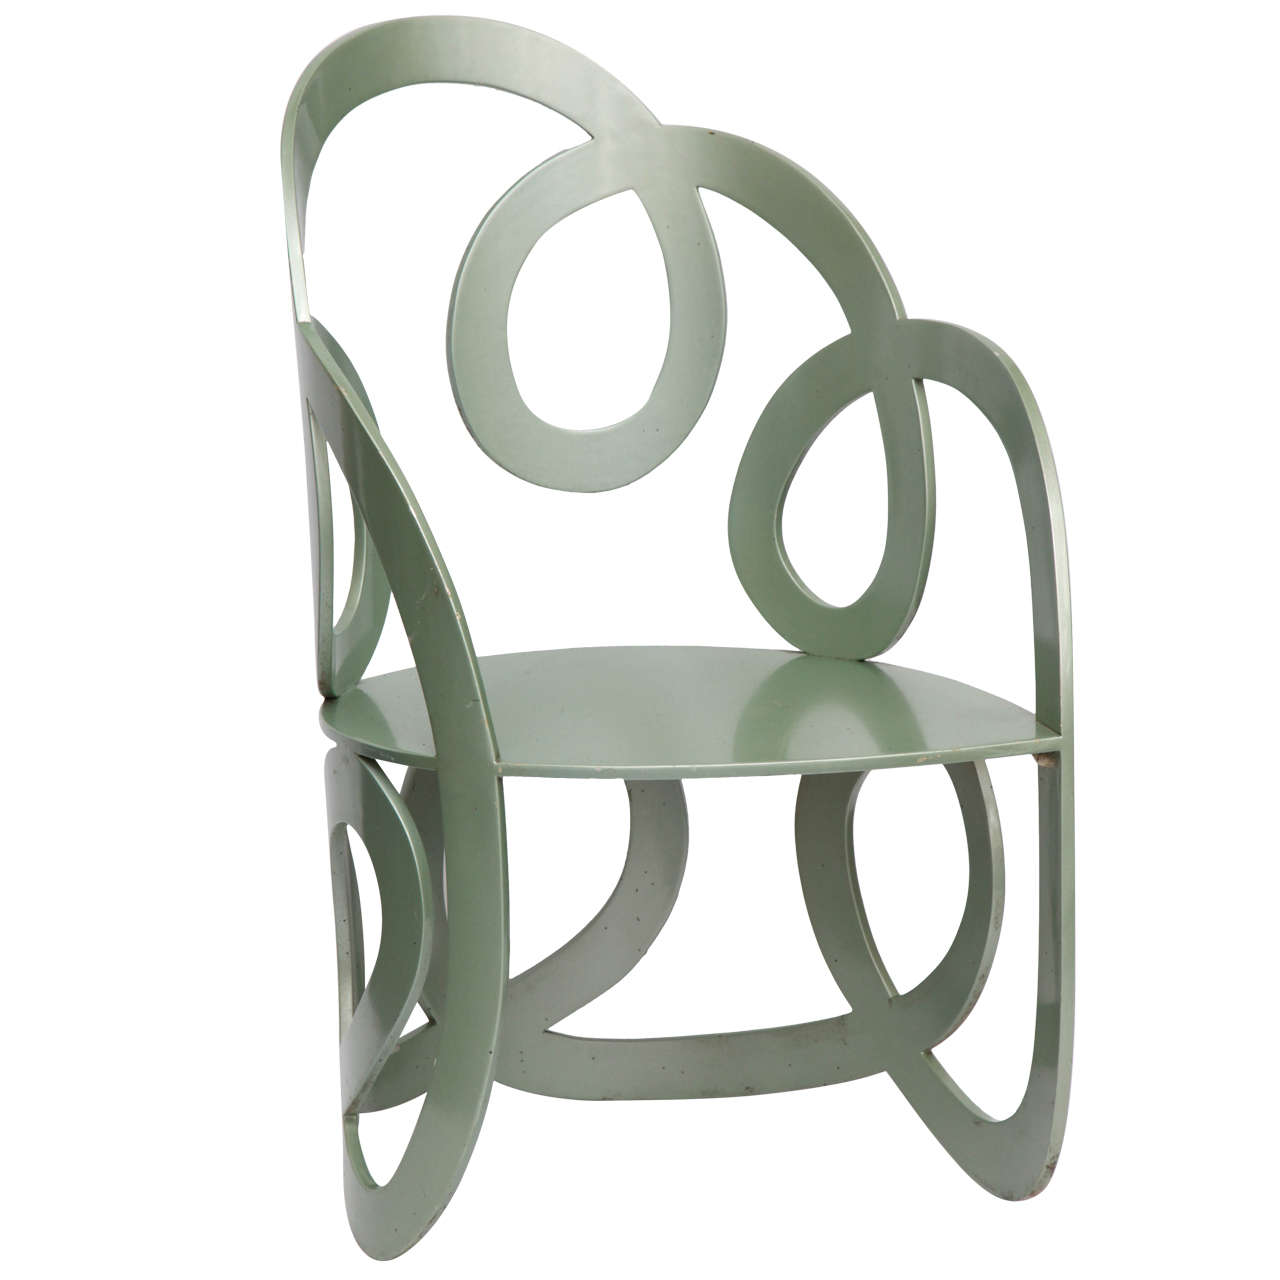 1980s Sculptural Chair Crafted of Painted Metal